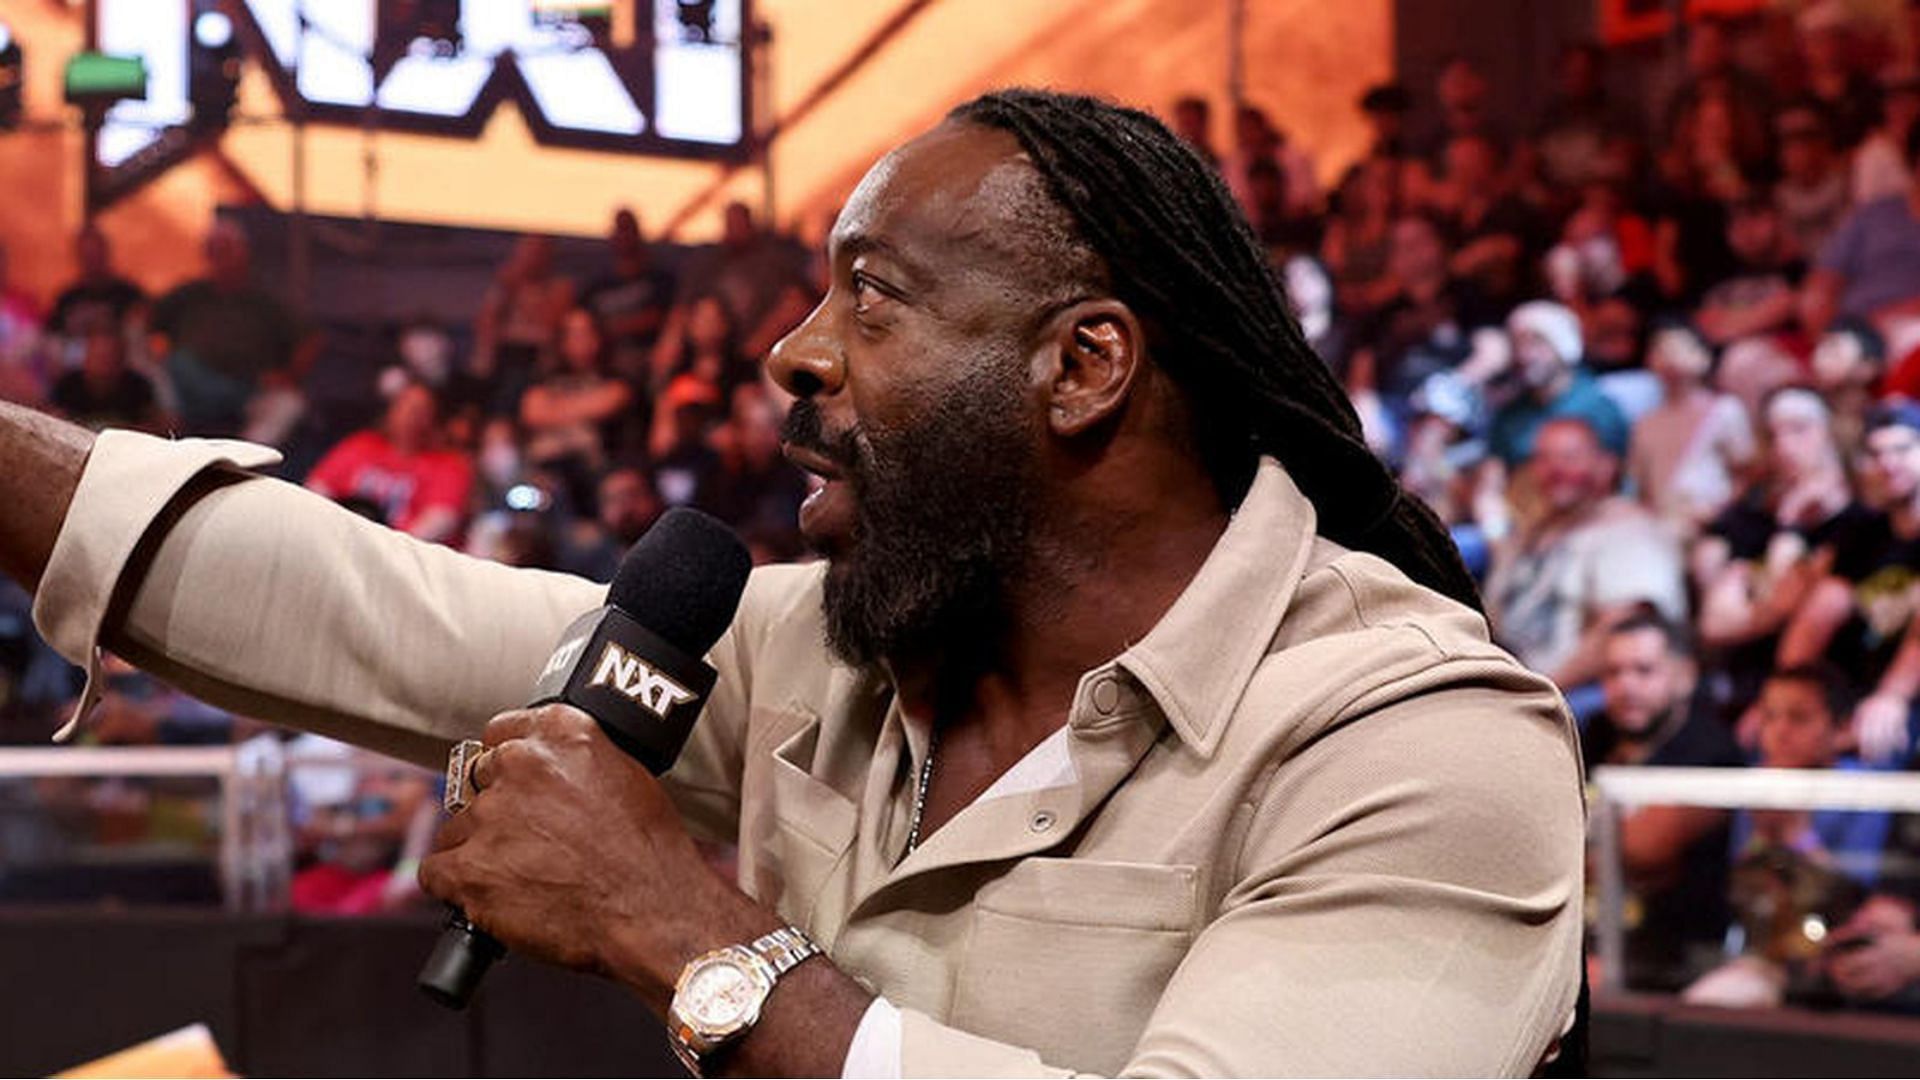 WWE Hall of Famer and NXT commentator Booker T